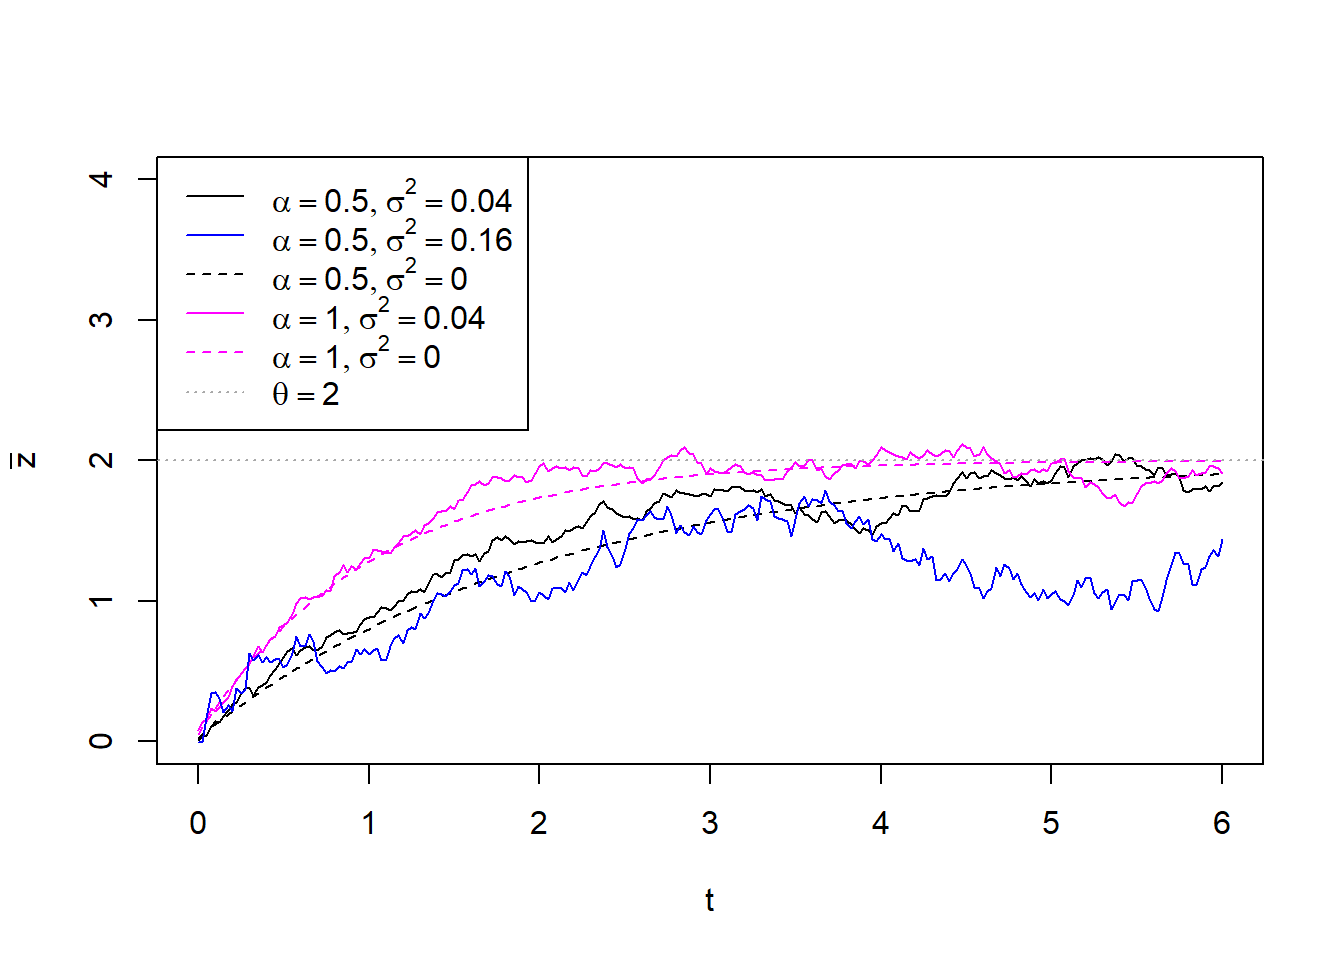 Dashed black and magenta lines denote the deterministic trend towards the long-term mean $\theta$, fixing the stochastic parameter $\sigma=0$.